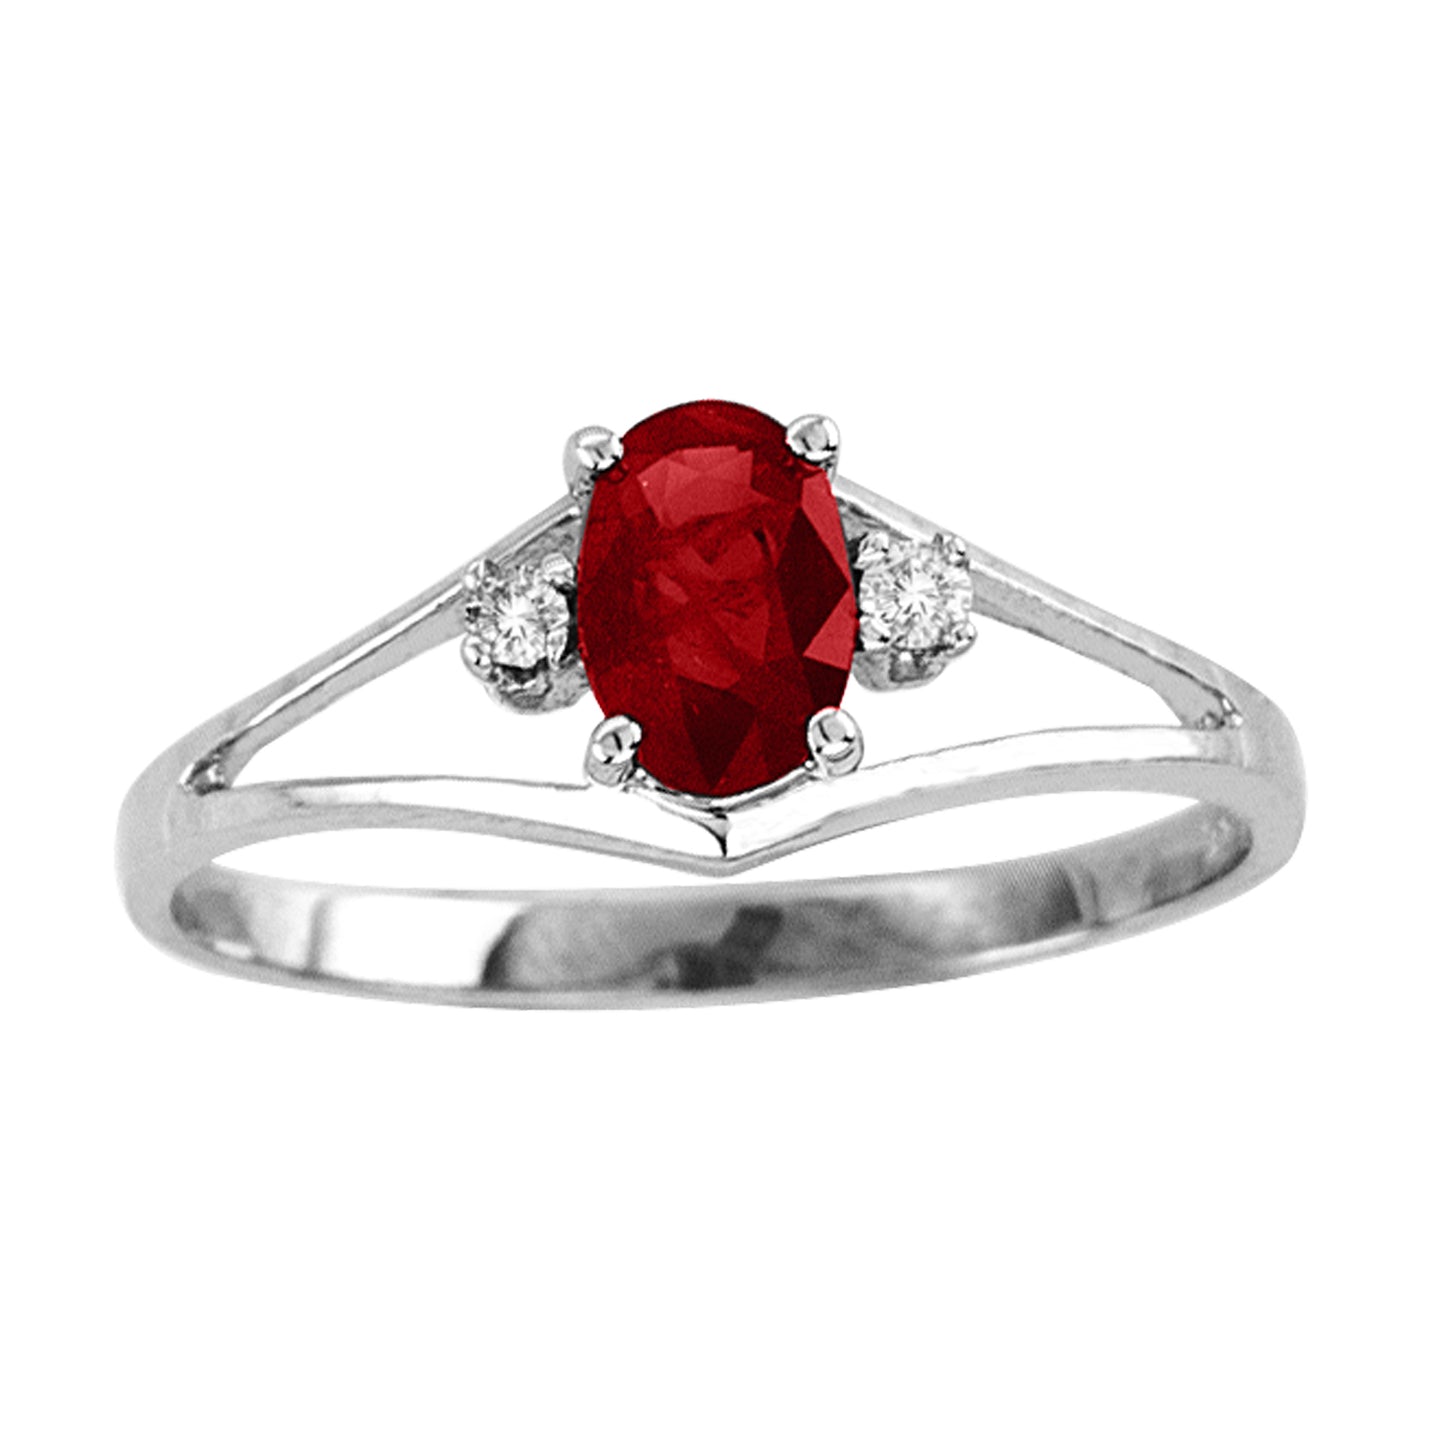 Red Ruby & Diamond Engagement Ring in 14k White Gold